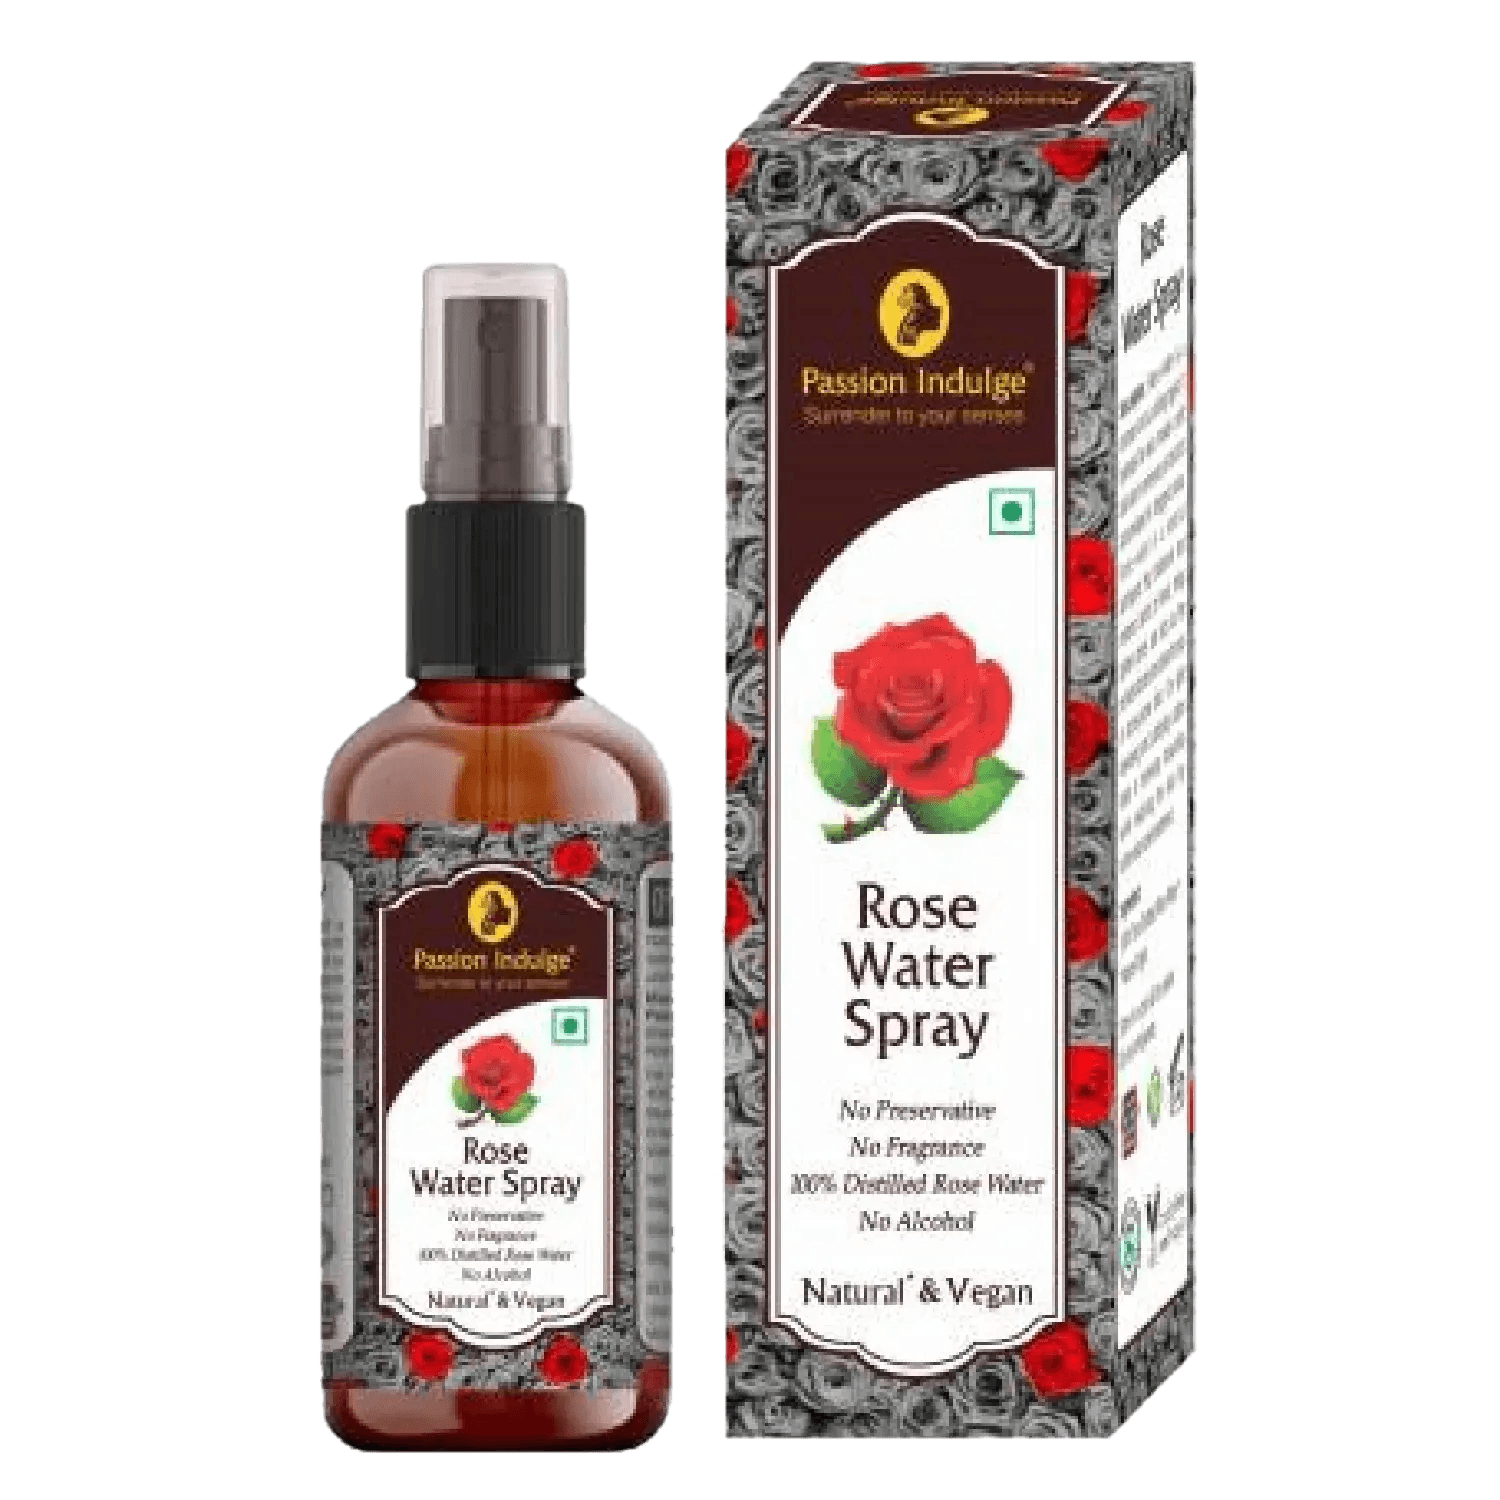 Passion Indulge | Passion Indulge Rose Water (Buy 1 Get 1 Free) (100ml Each)